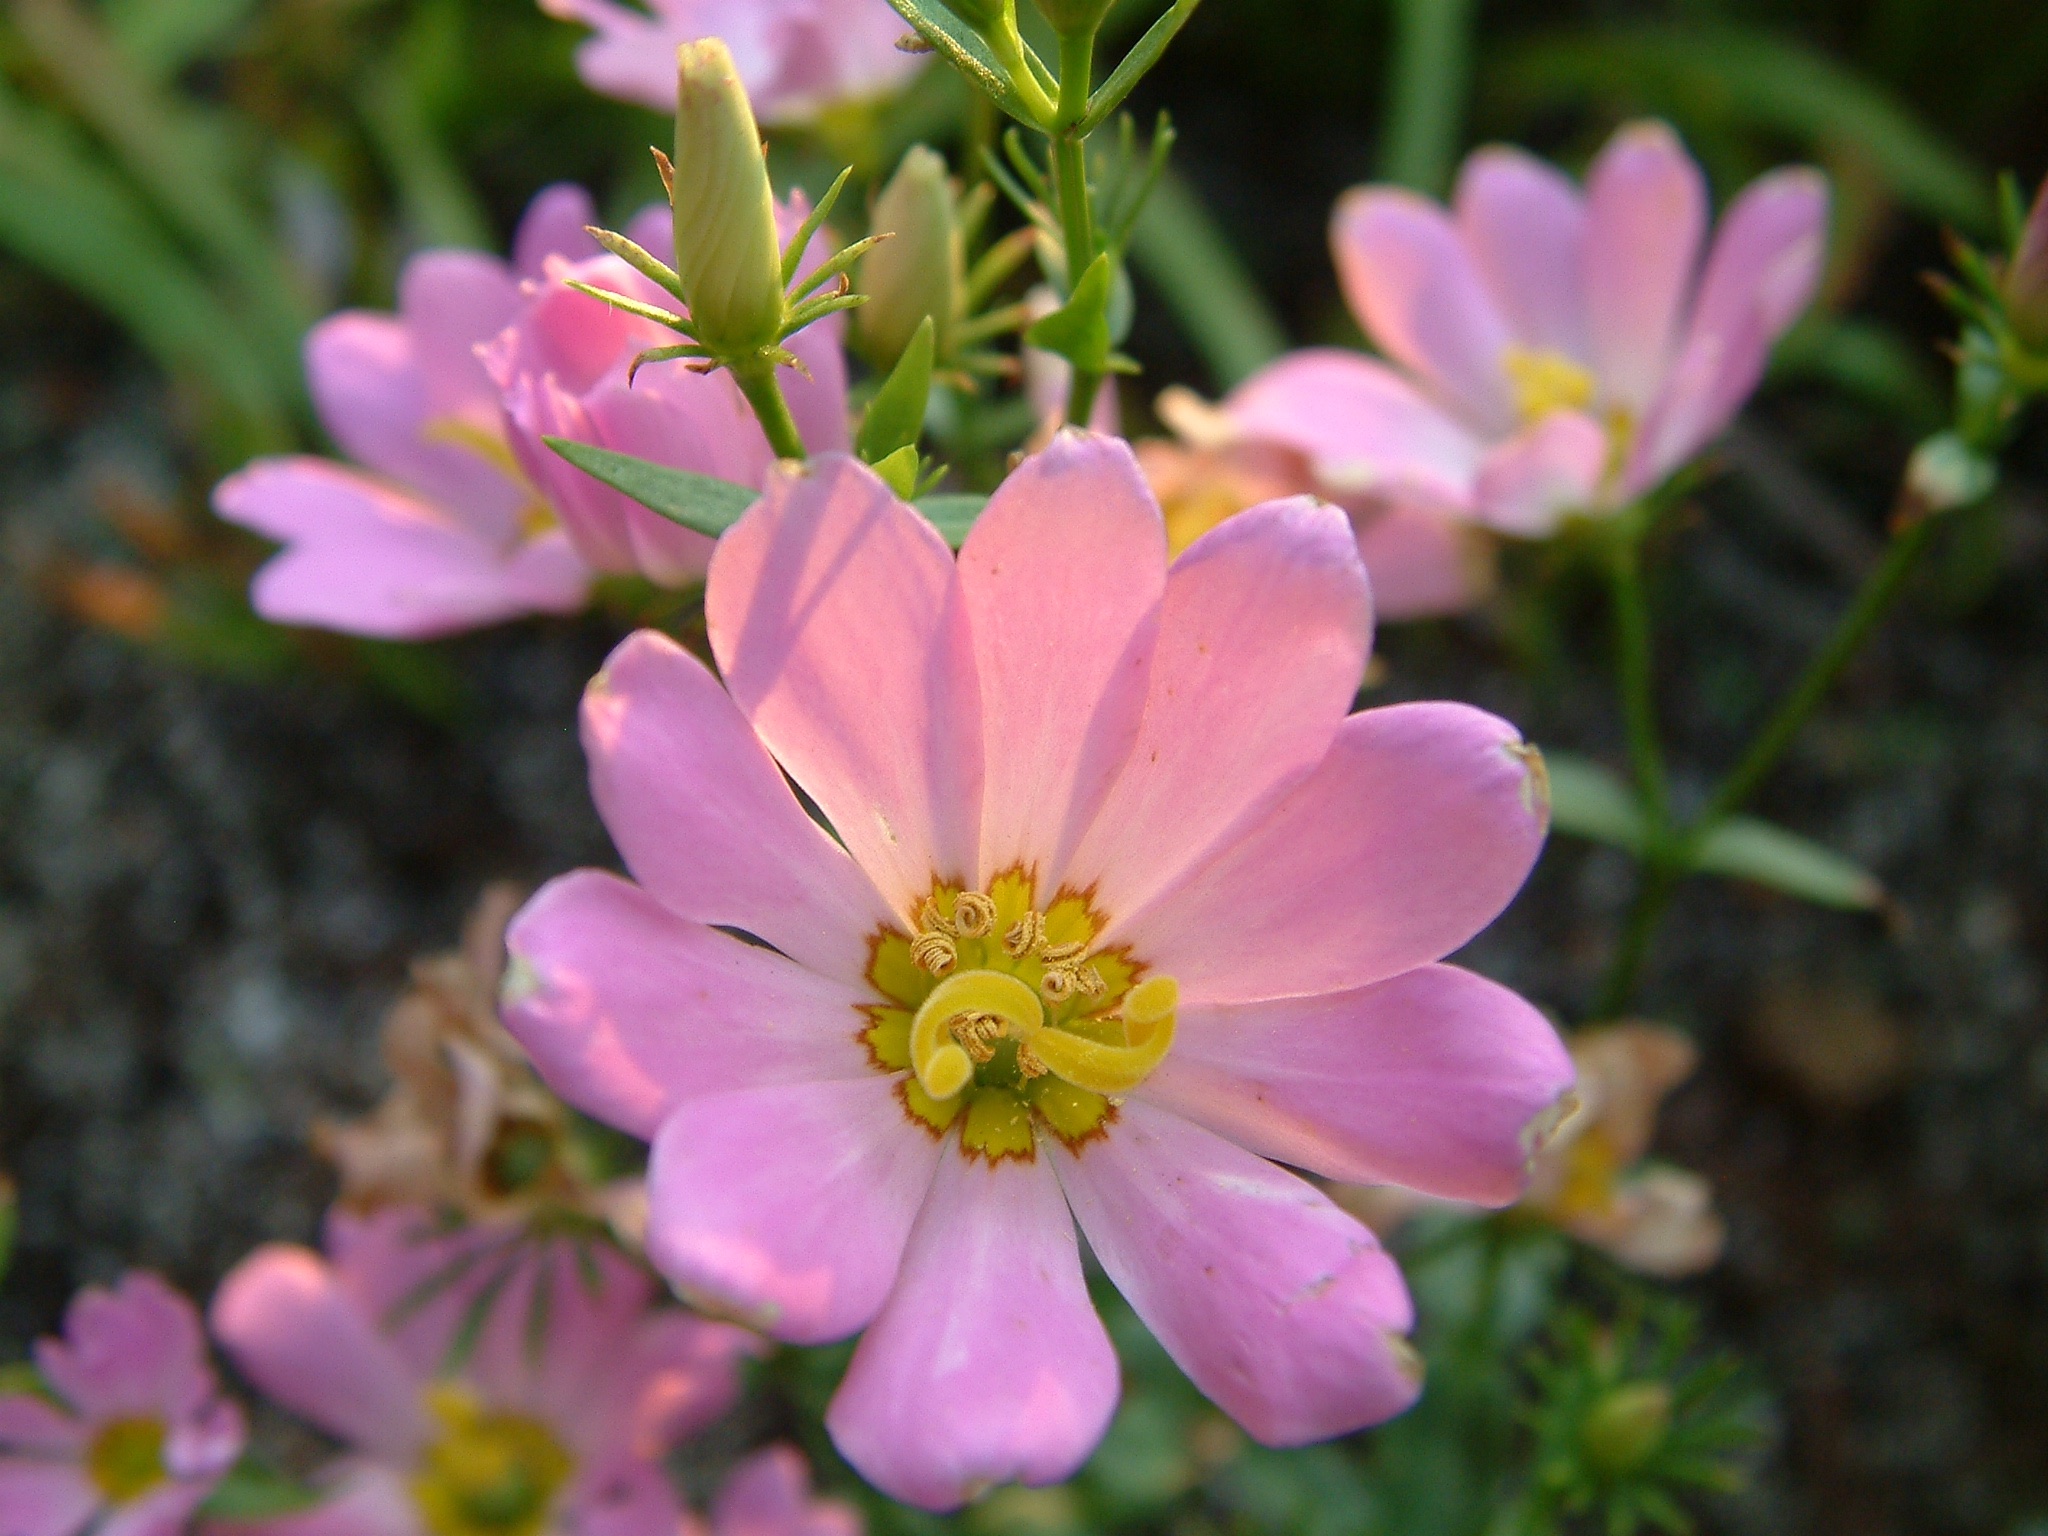 The Scientific Name is Sabatia dodecandra. You will likely hear them called Perennial Sea-pink, Large Marsh Rose-pink. This picture shows the 10-12 rose-pink petals with yellow at the base of each petal. of Sabatia dodecandra